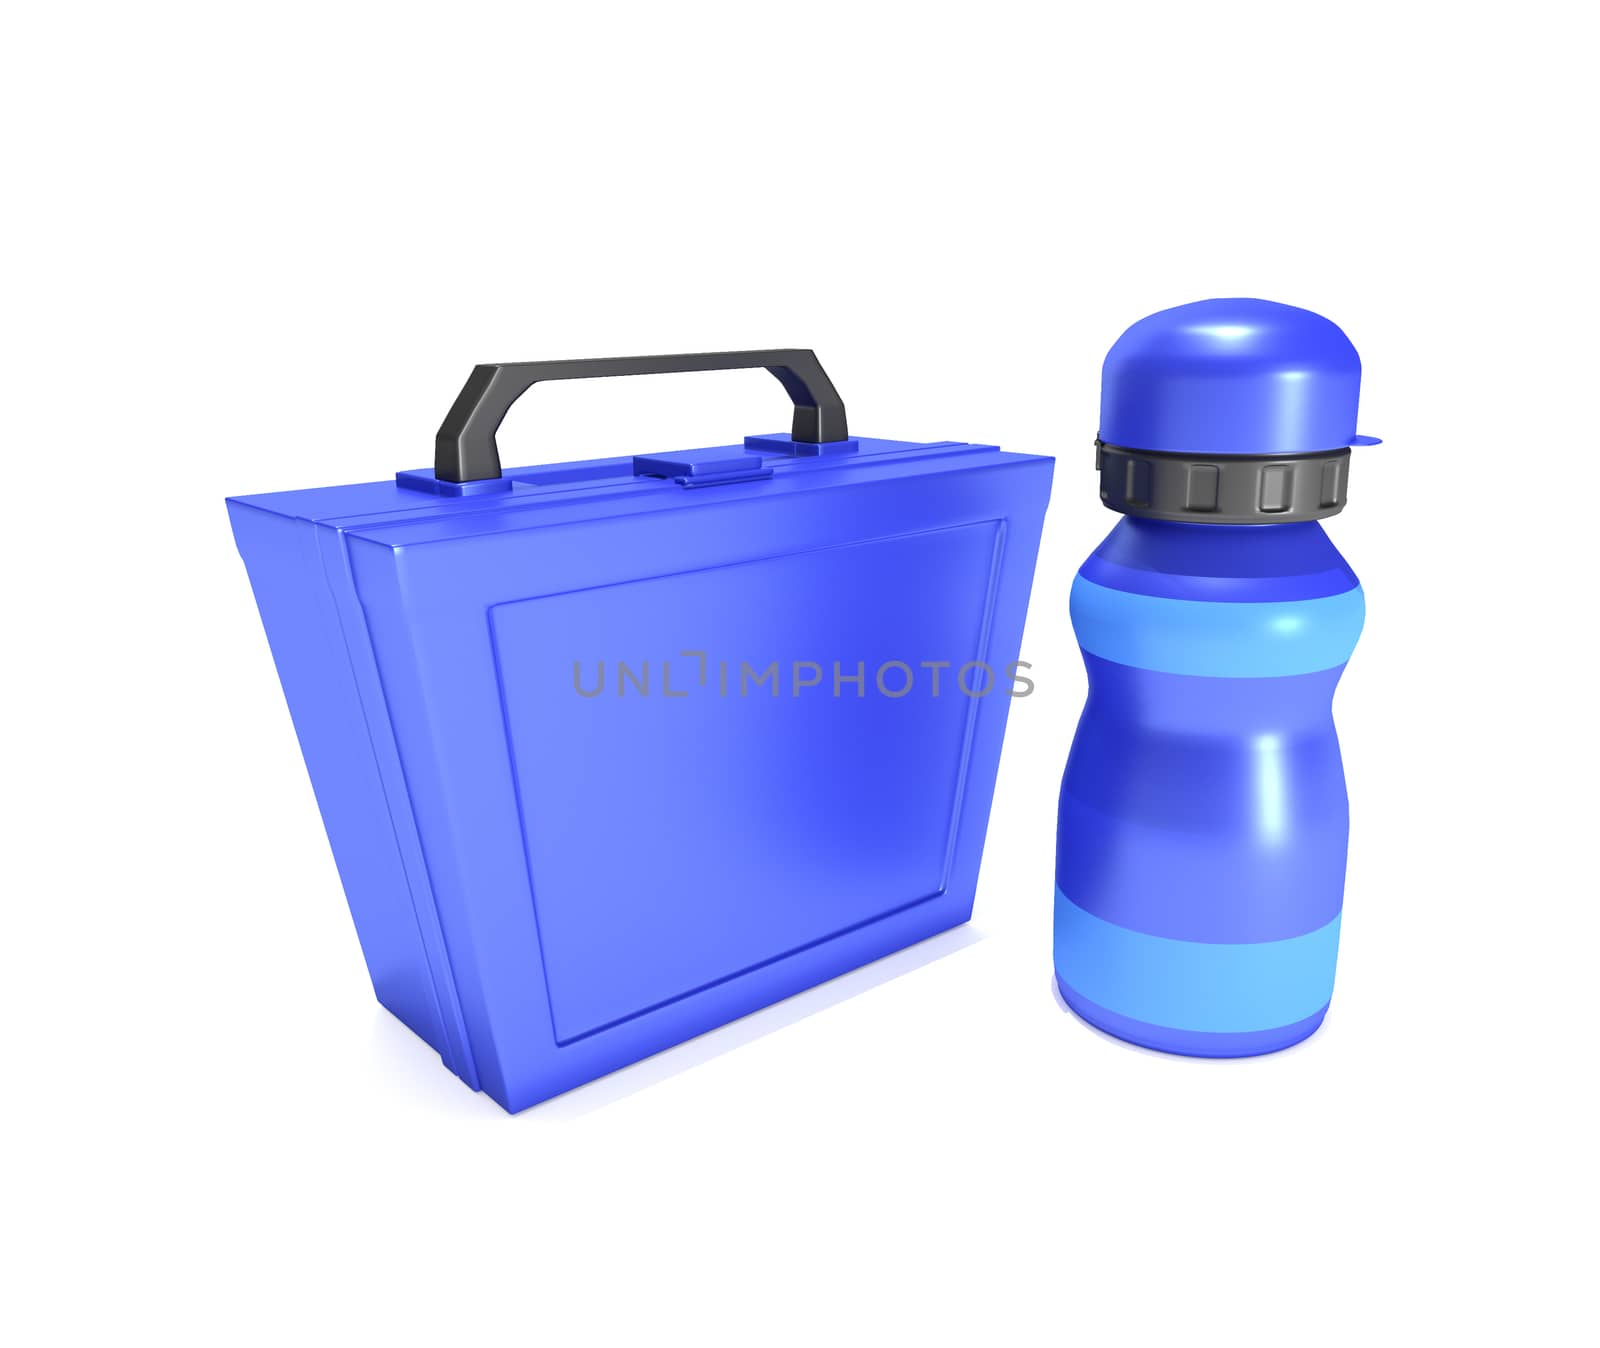 Illustration depicting a blue childs lunchbox and flask arranged over white.